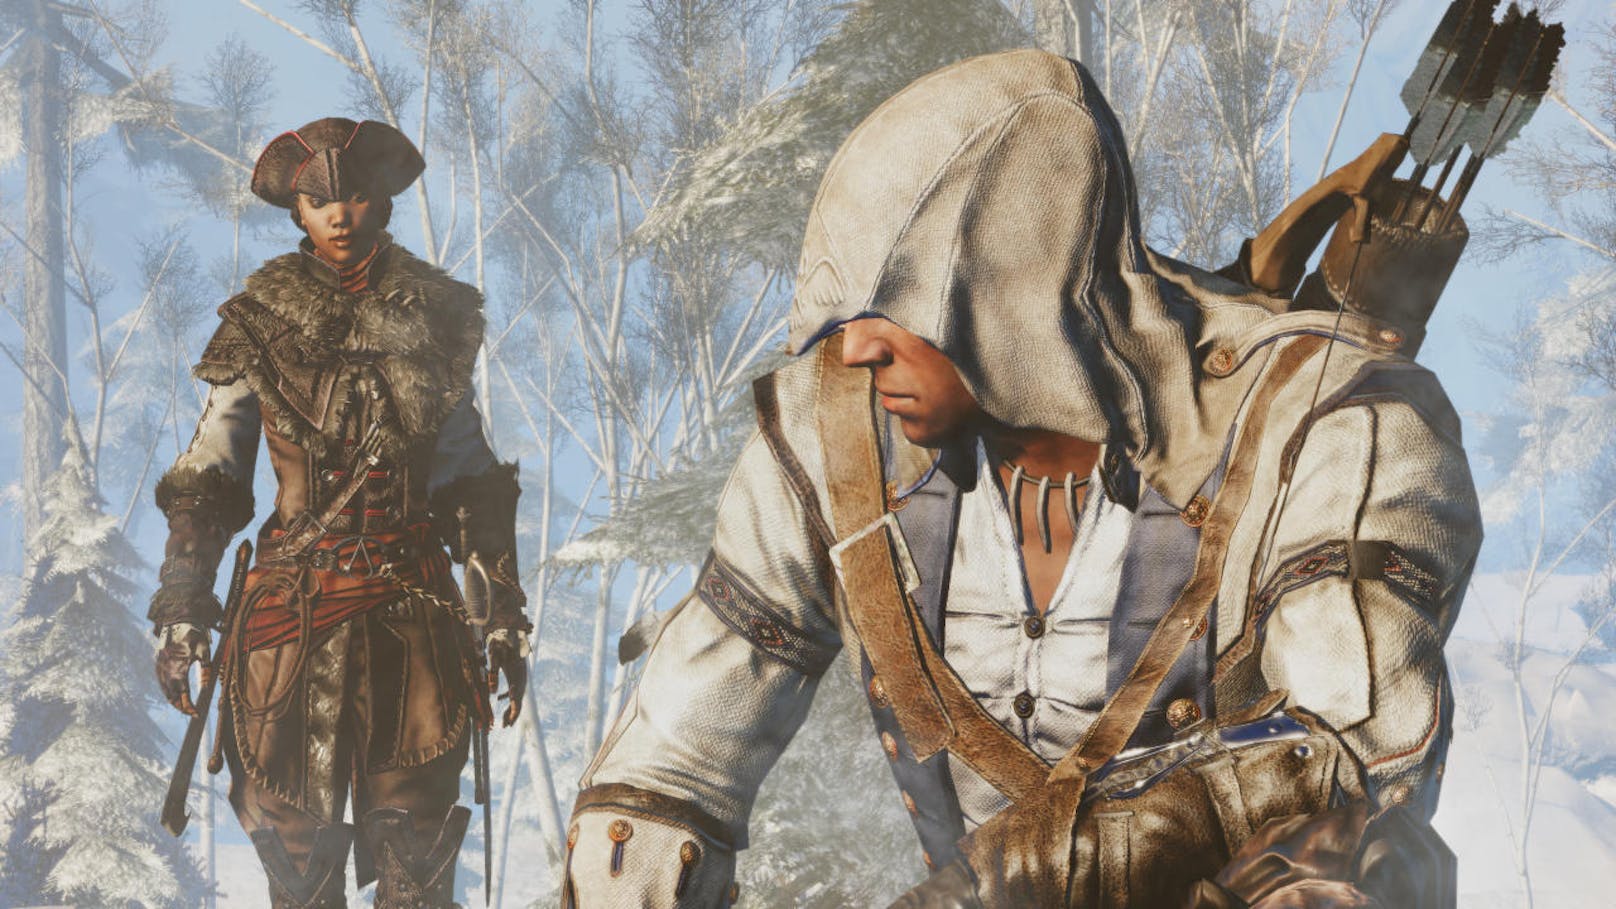  <a href="https://www.heute.at/digital/games/story/Assassin-s-Creed-III-Remastered-Review-Test-48415172" target="_blank">Assassin's Creed III Remastered</a>